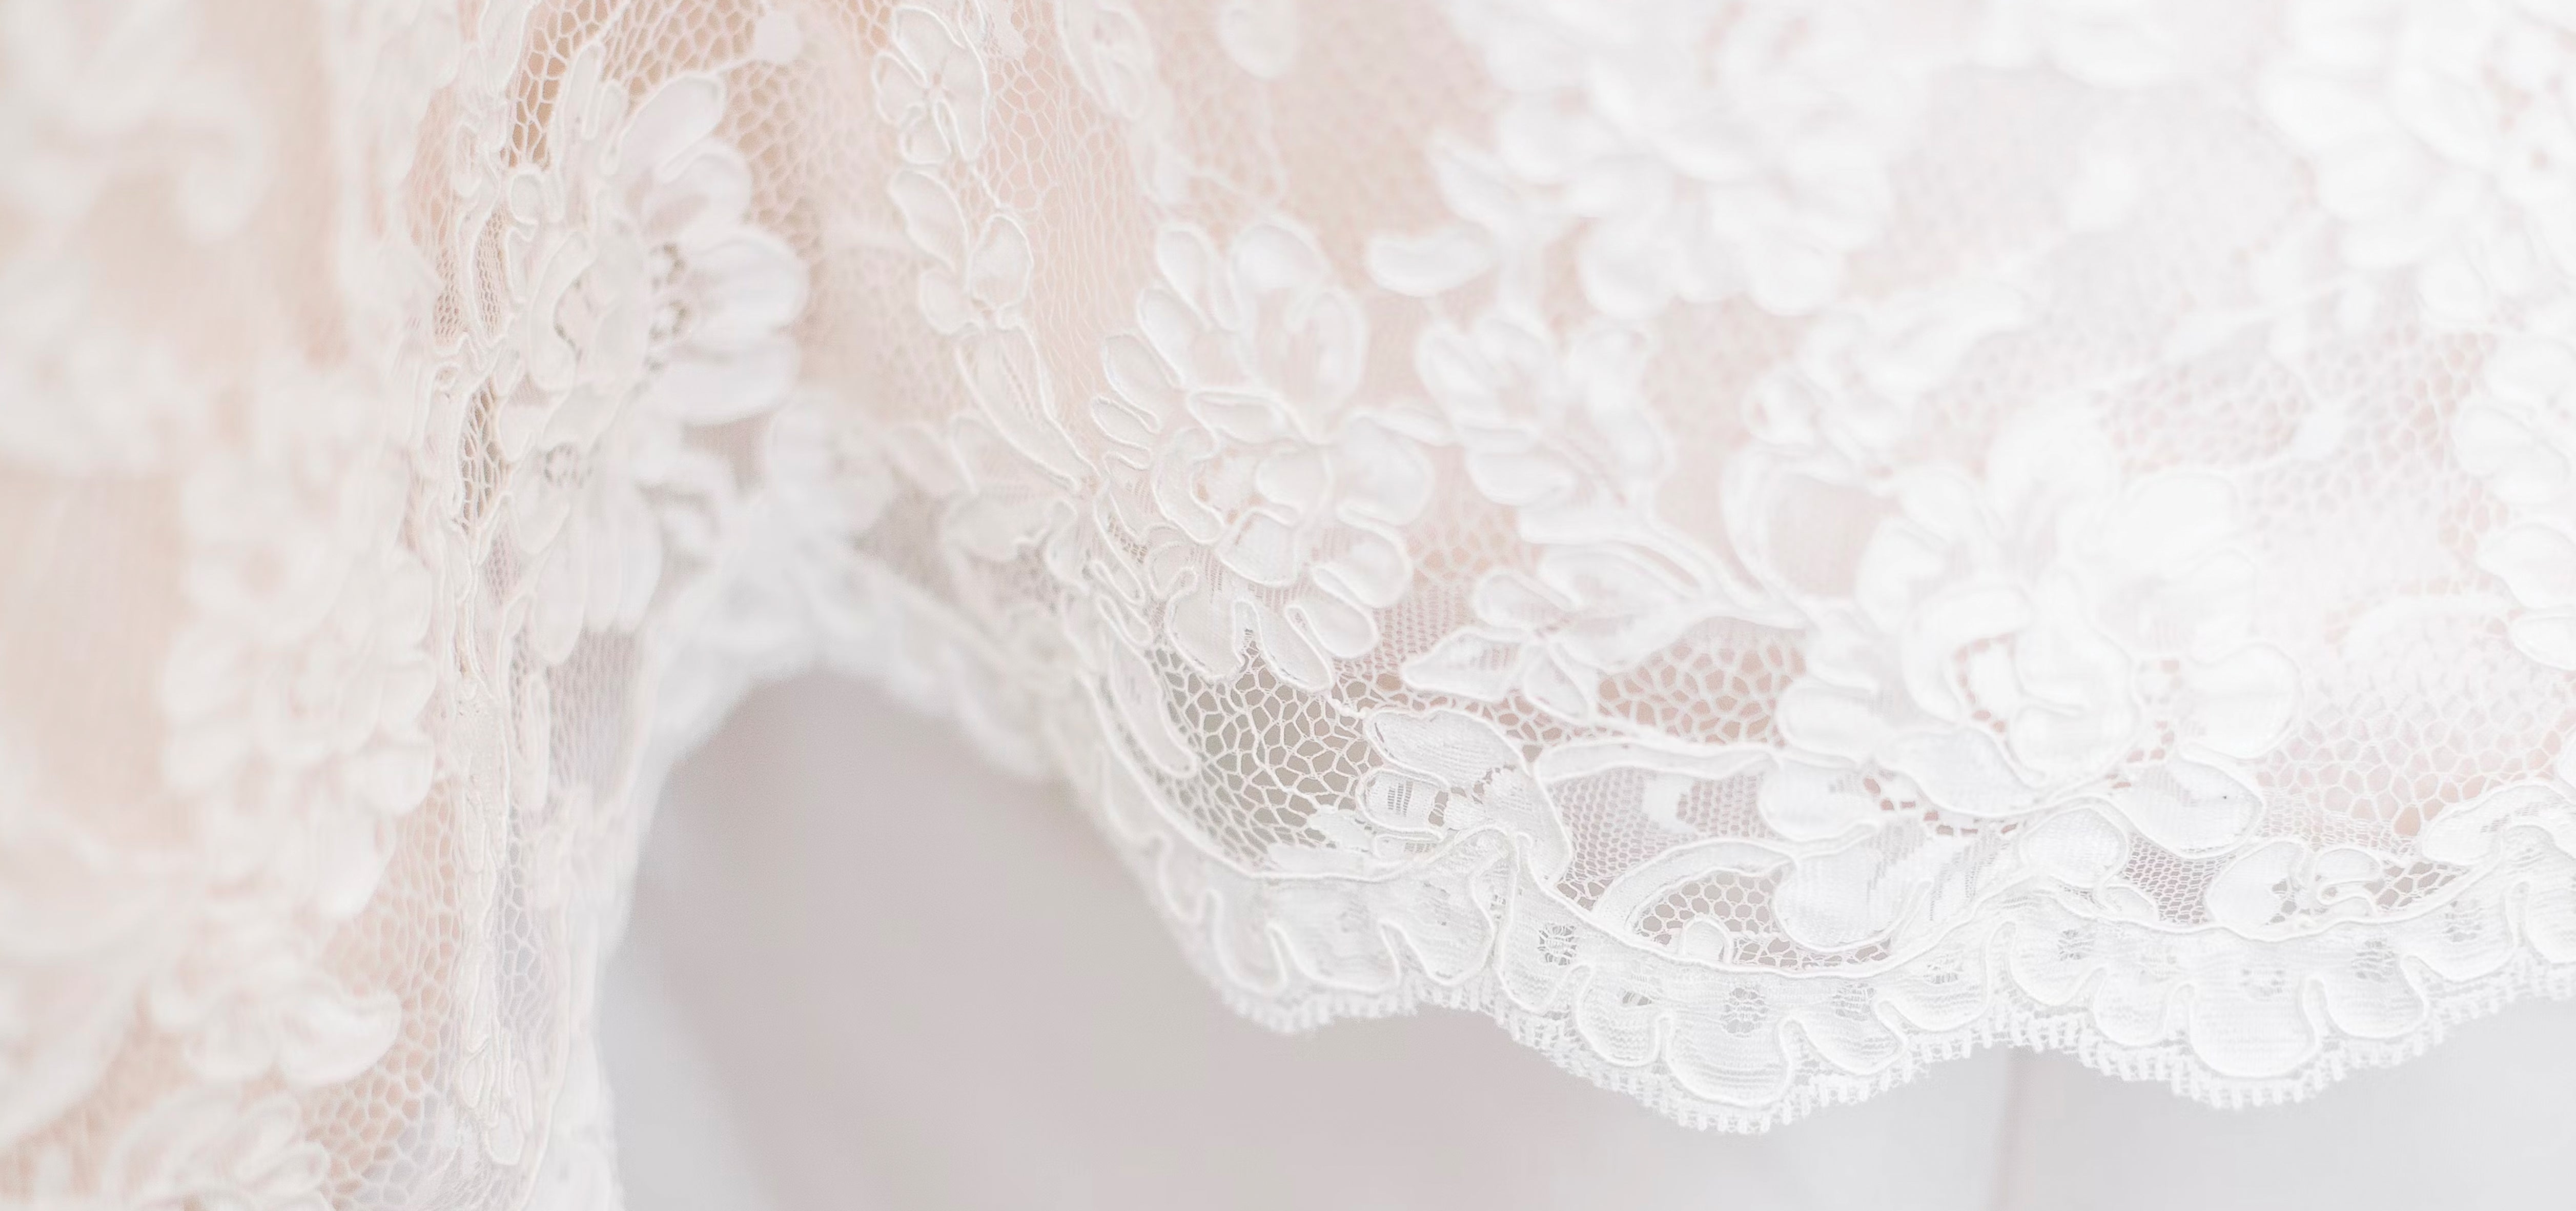 Lace Elegance: Elevating Your Wedding Look with Exquisite Lace Wedding Shoes